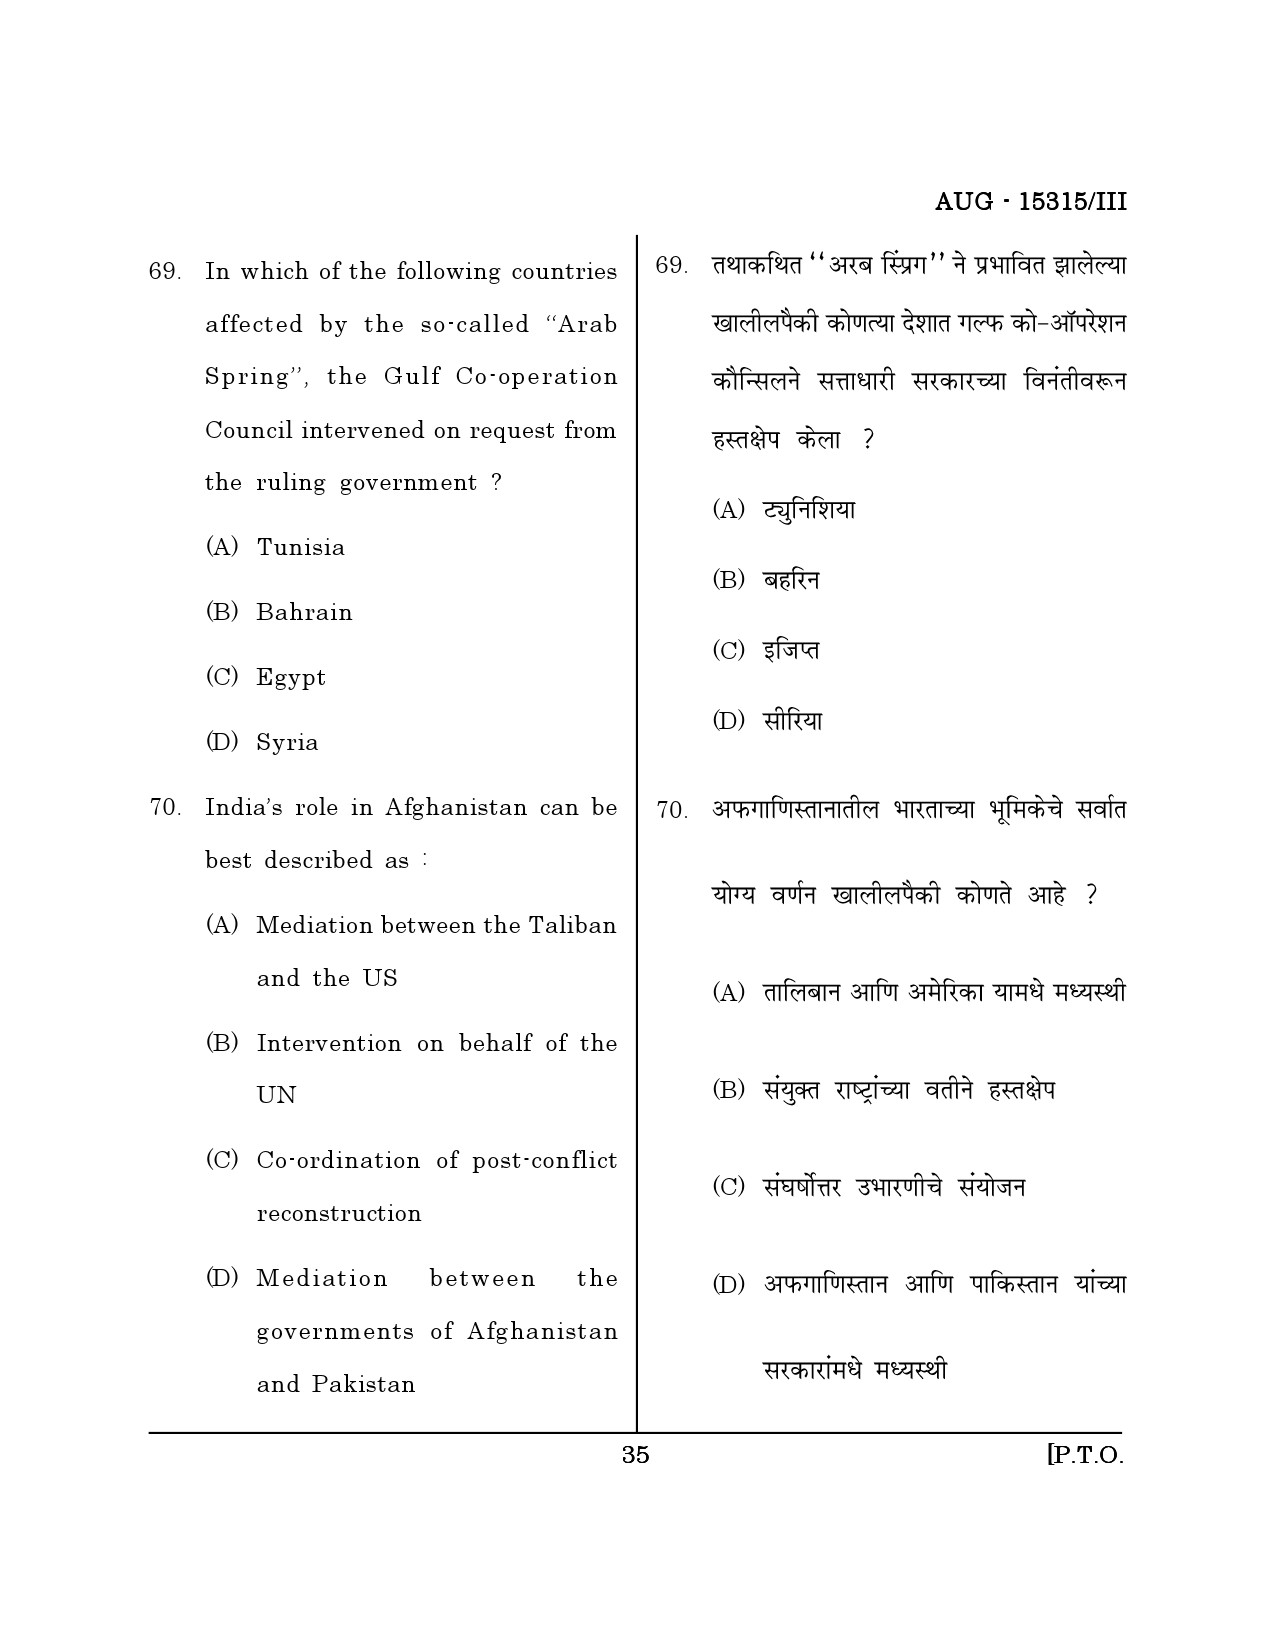 Maharashtra SET Political Science Question Paper III August 2015 34